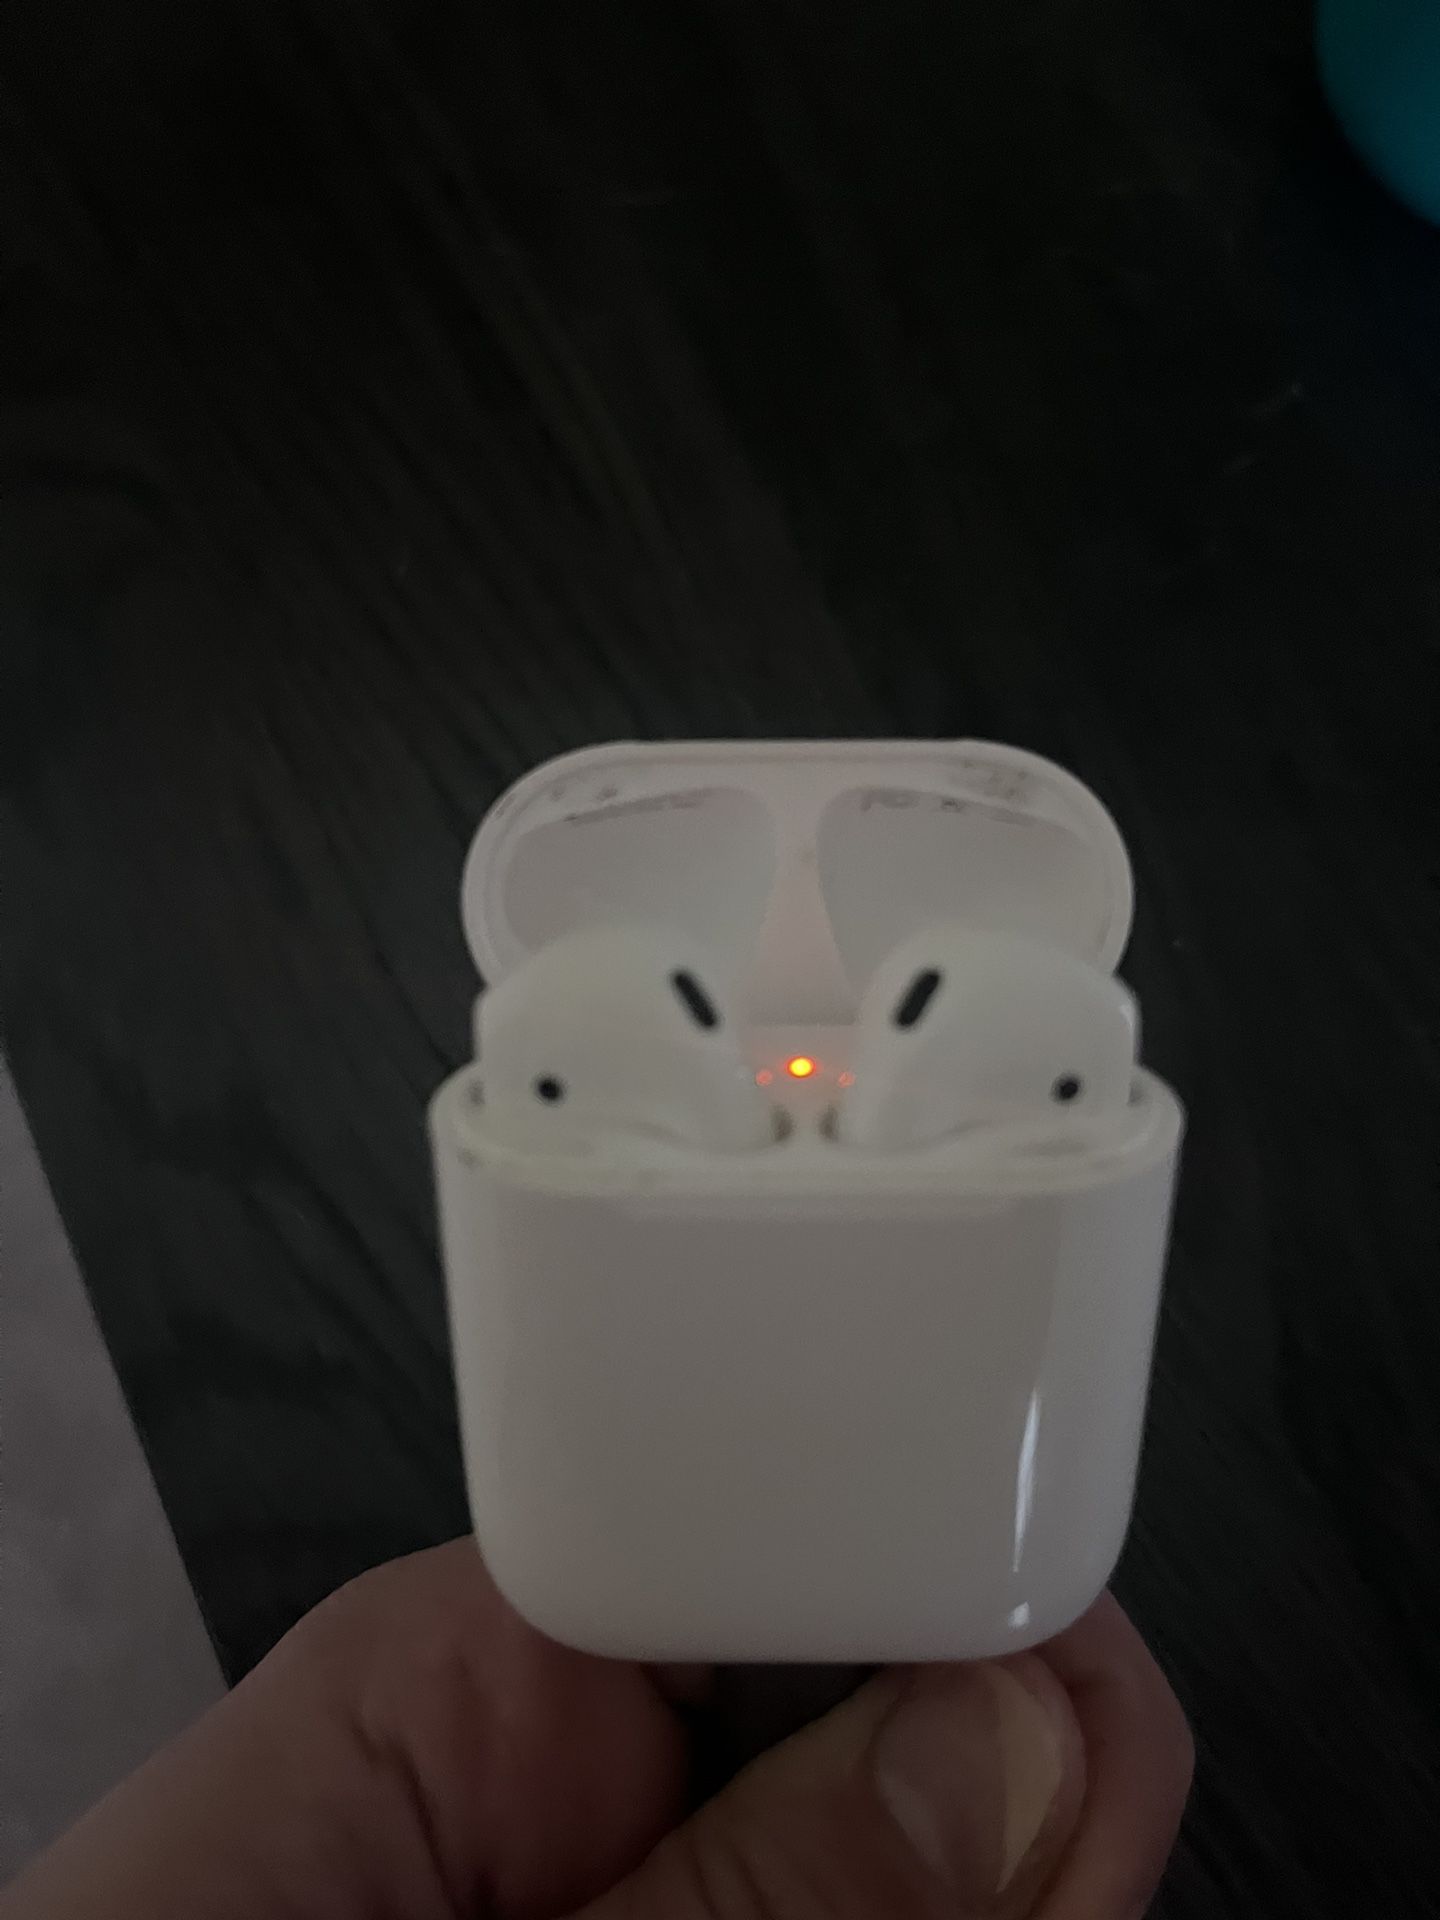 For Parts: Apple AirPods Gen 2